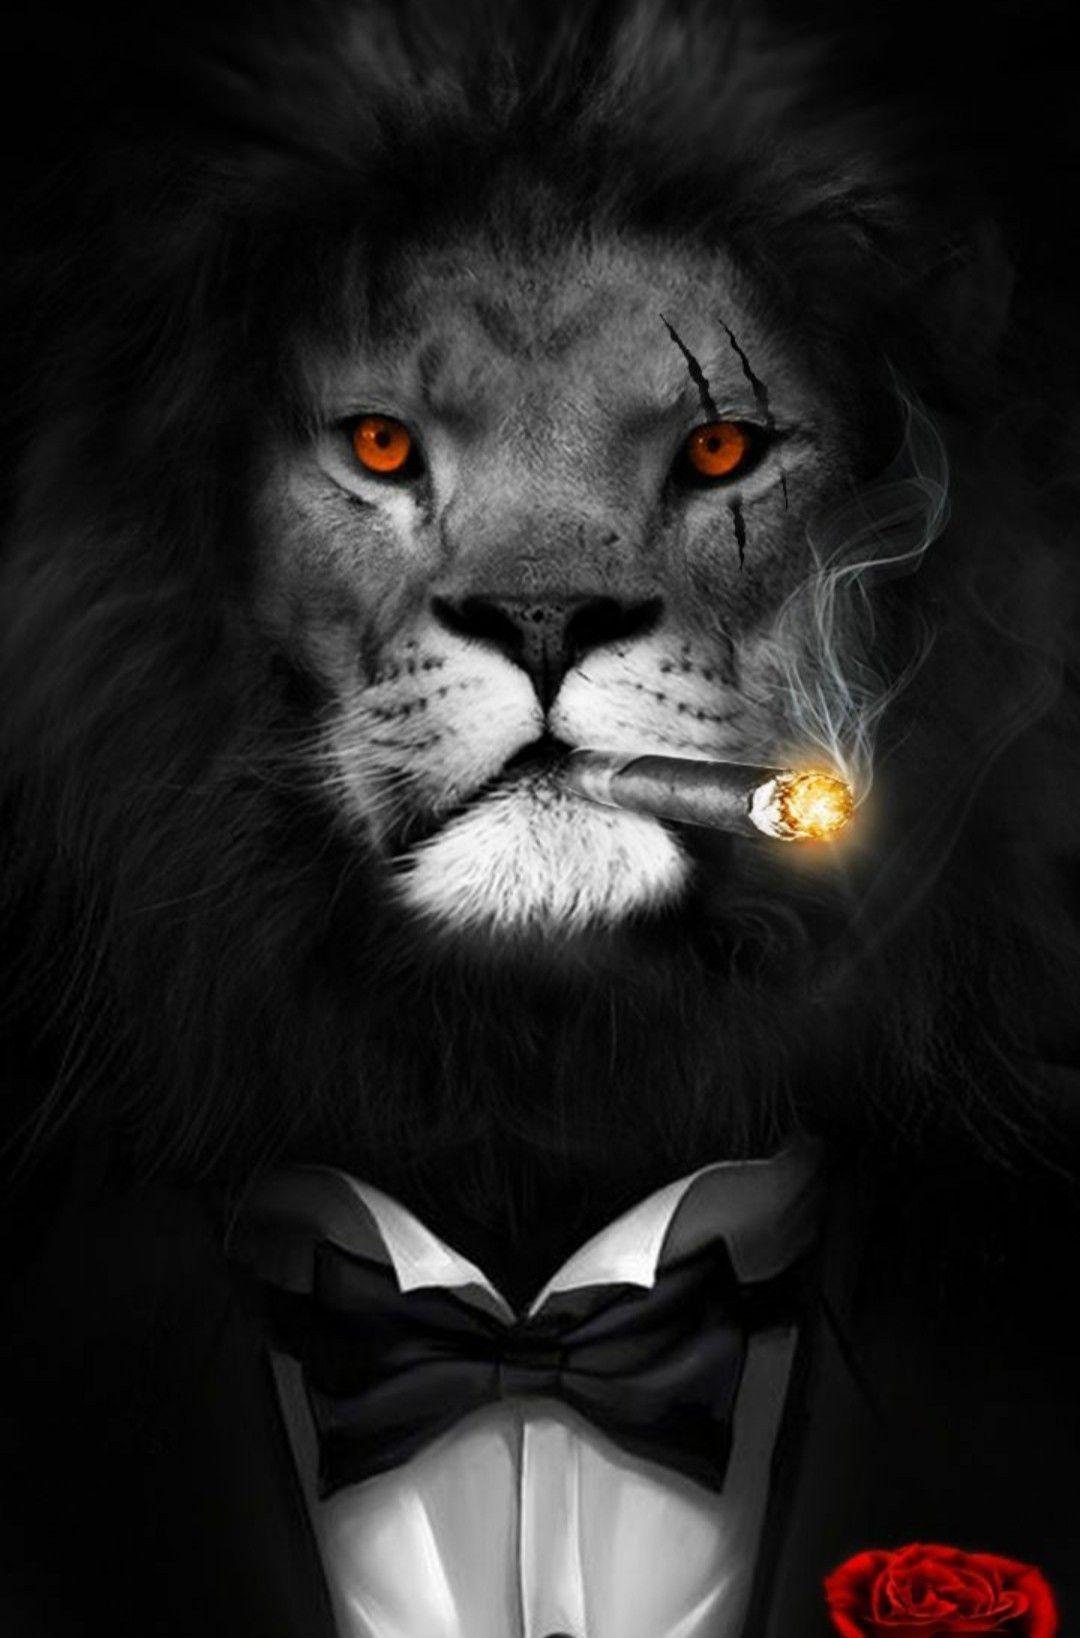 Evil Lions Wallpapers - Top Free Evil Lions Backgrounds ...